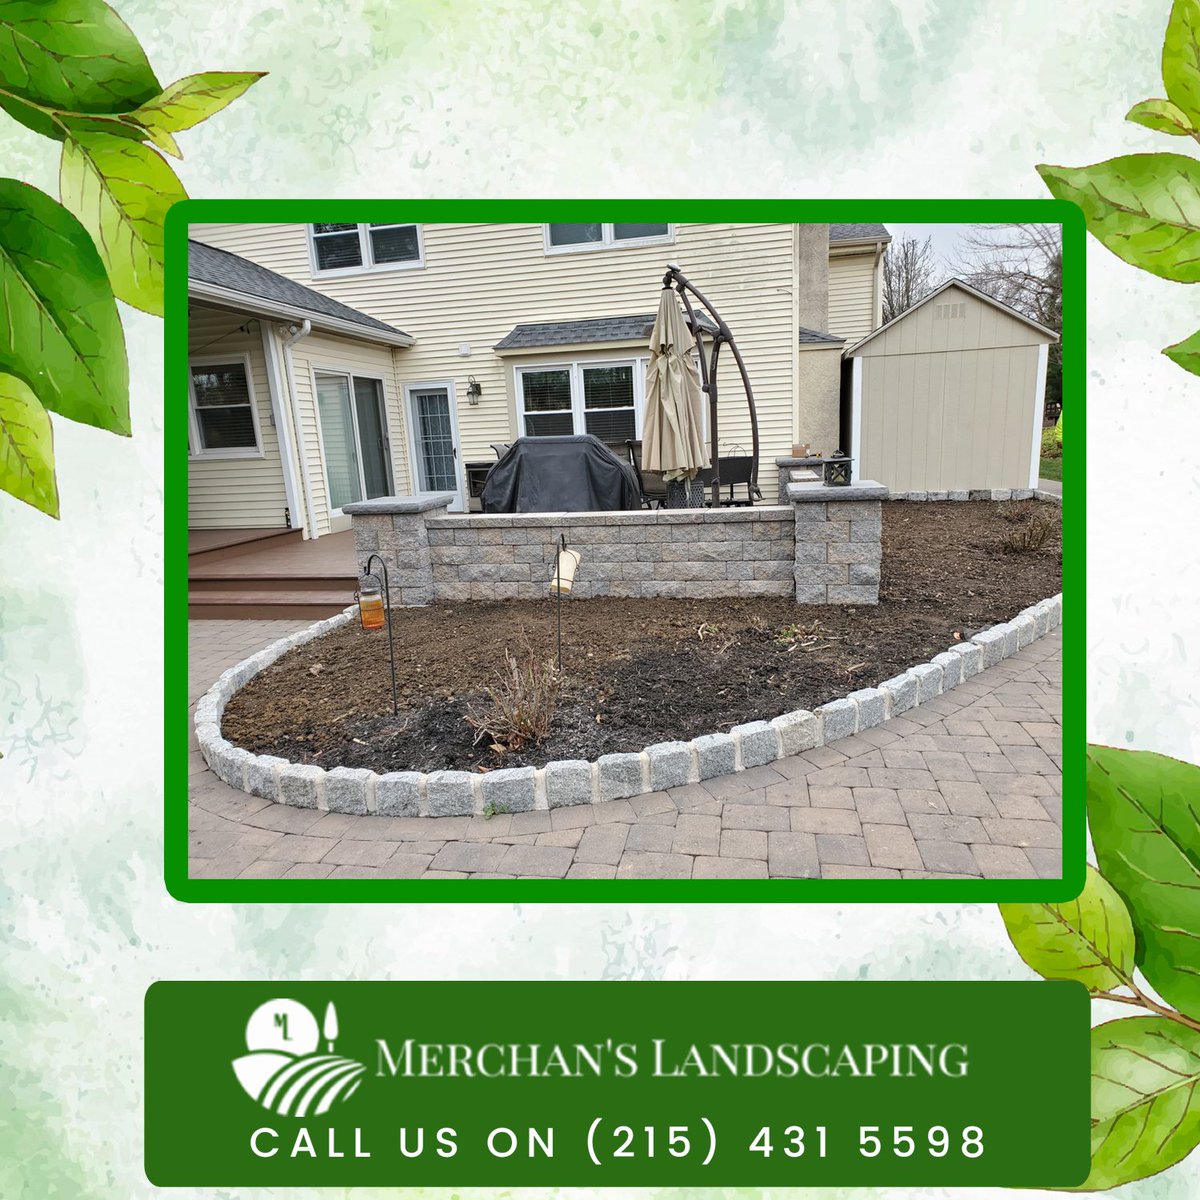 Our hardscaping services will give your outdoor space a fresh new look. Visit merchanslandscaping.com/?utm_source=Tw…
#landscapinglife #landscapingideas #landscapingdesign #landscapingproject #landscapingcompany #hardscaping #hardscapingdesign